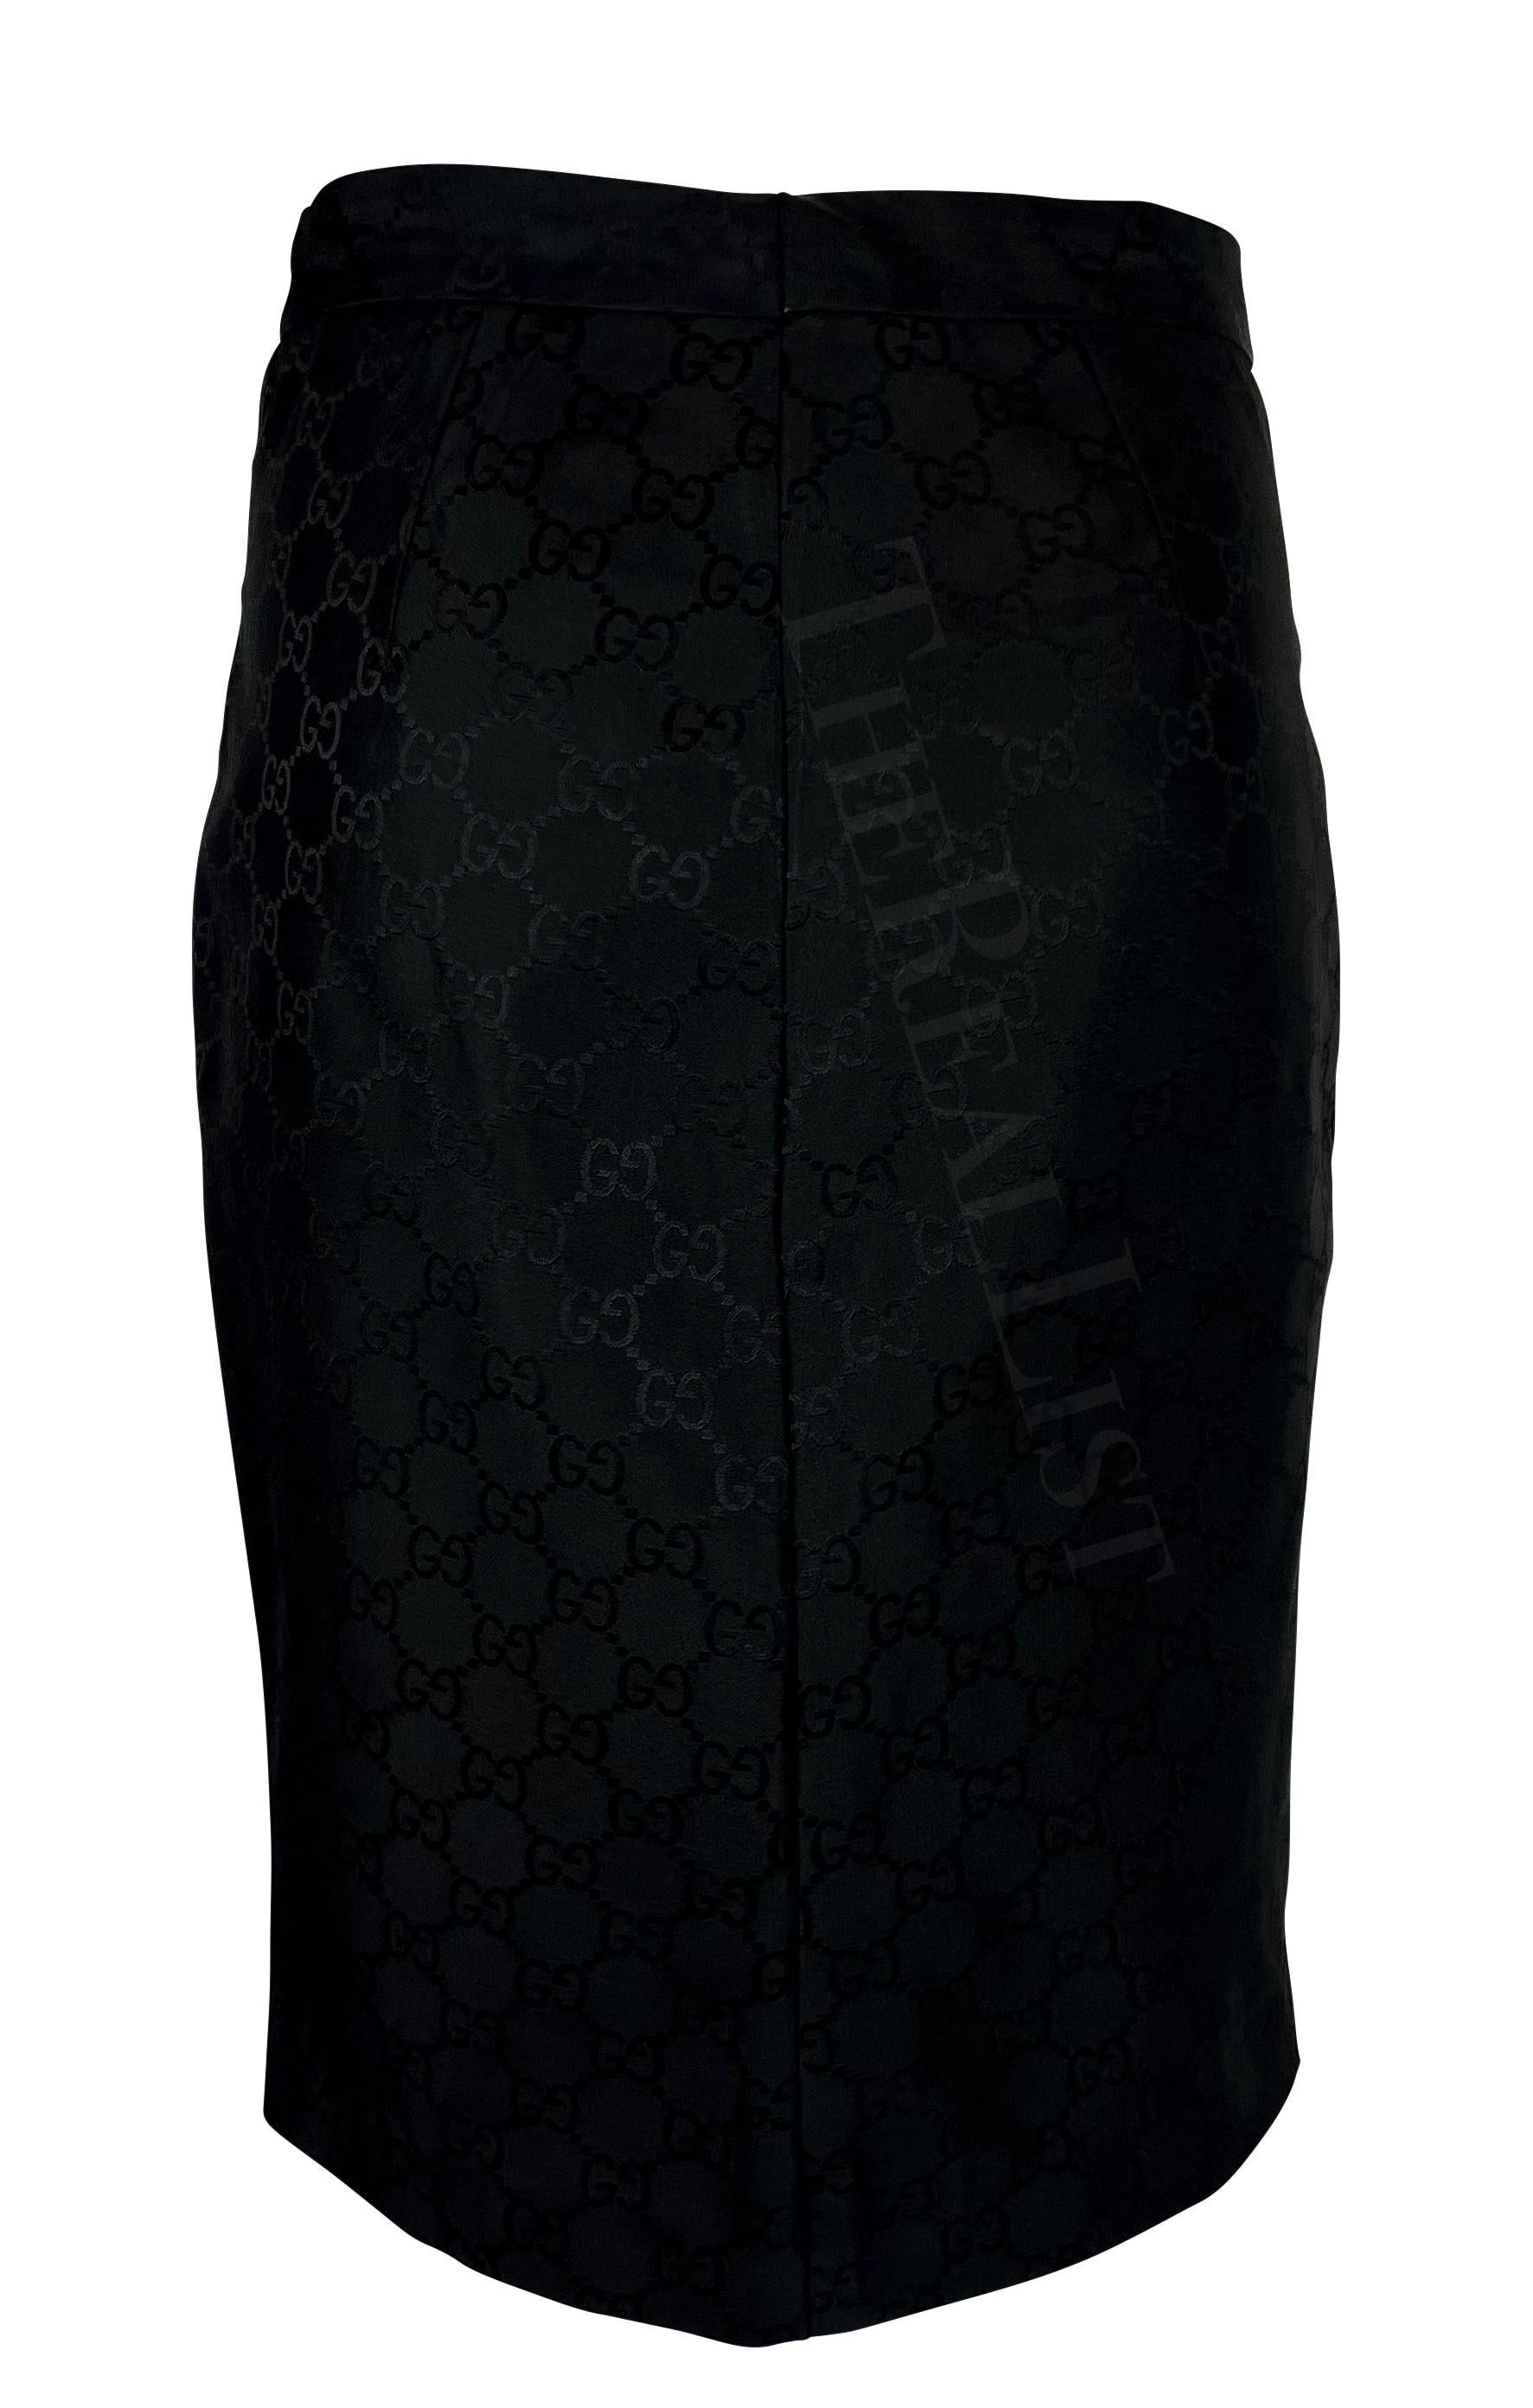 S/S 1998 Gucci by Tom Ford Black 'GG' Monogram Runway Skirt For Sale 1